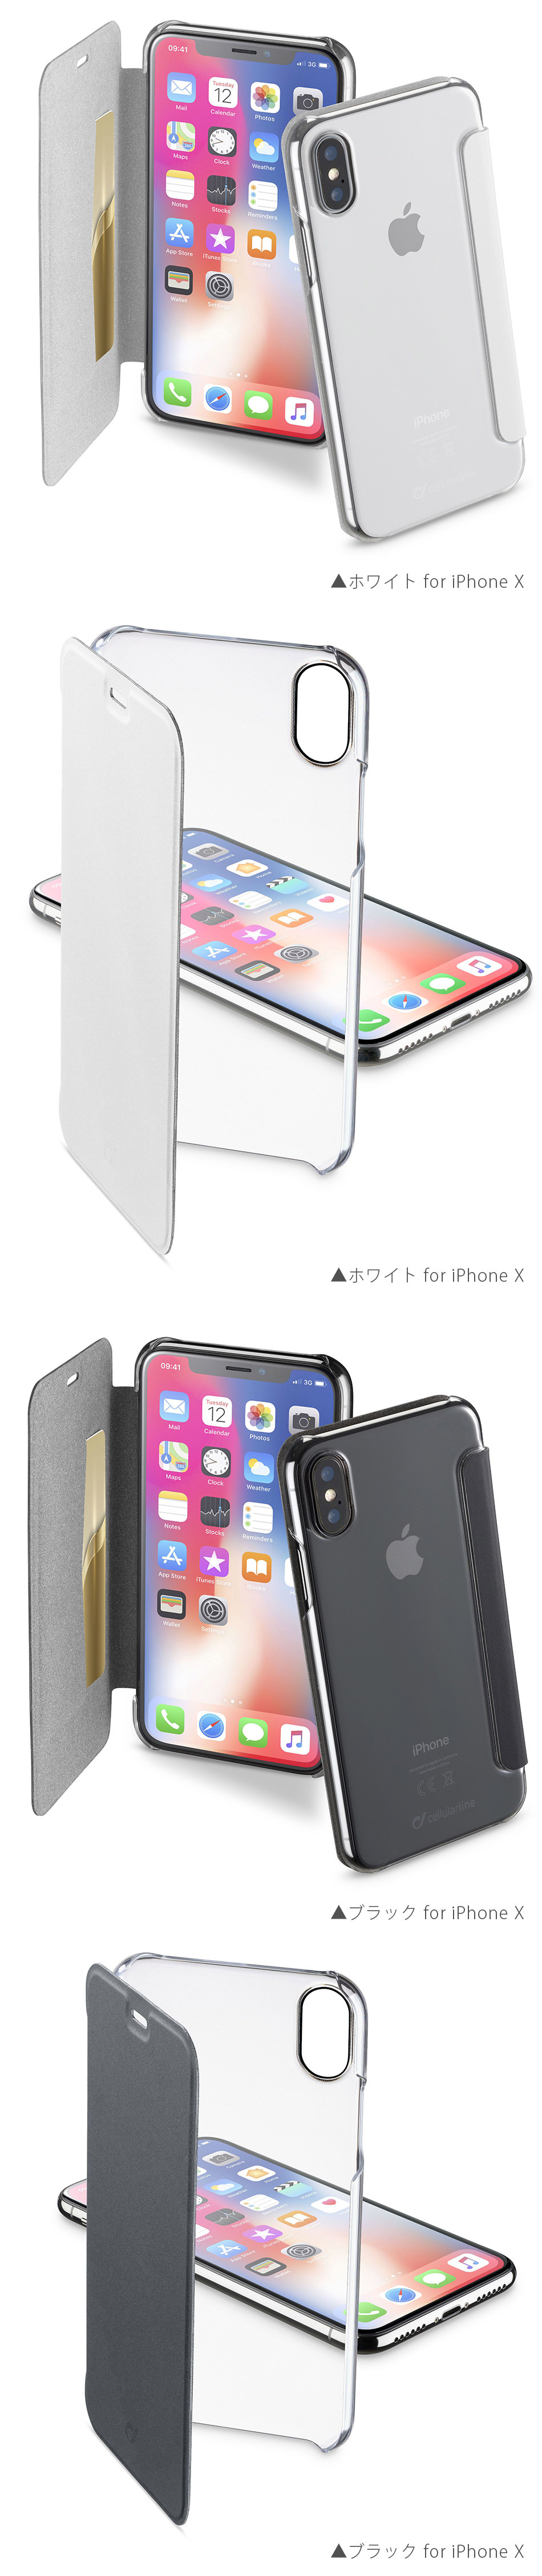 Clearbook for iPhoneX iPhone8 iPhone7 iPhone6s iPhone6